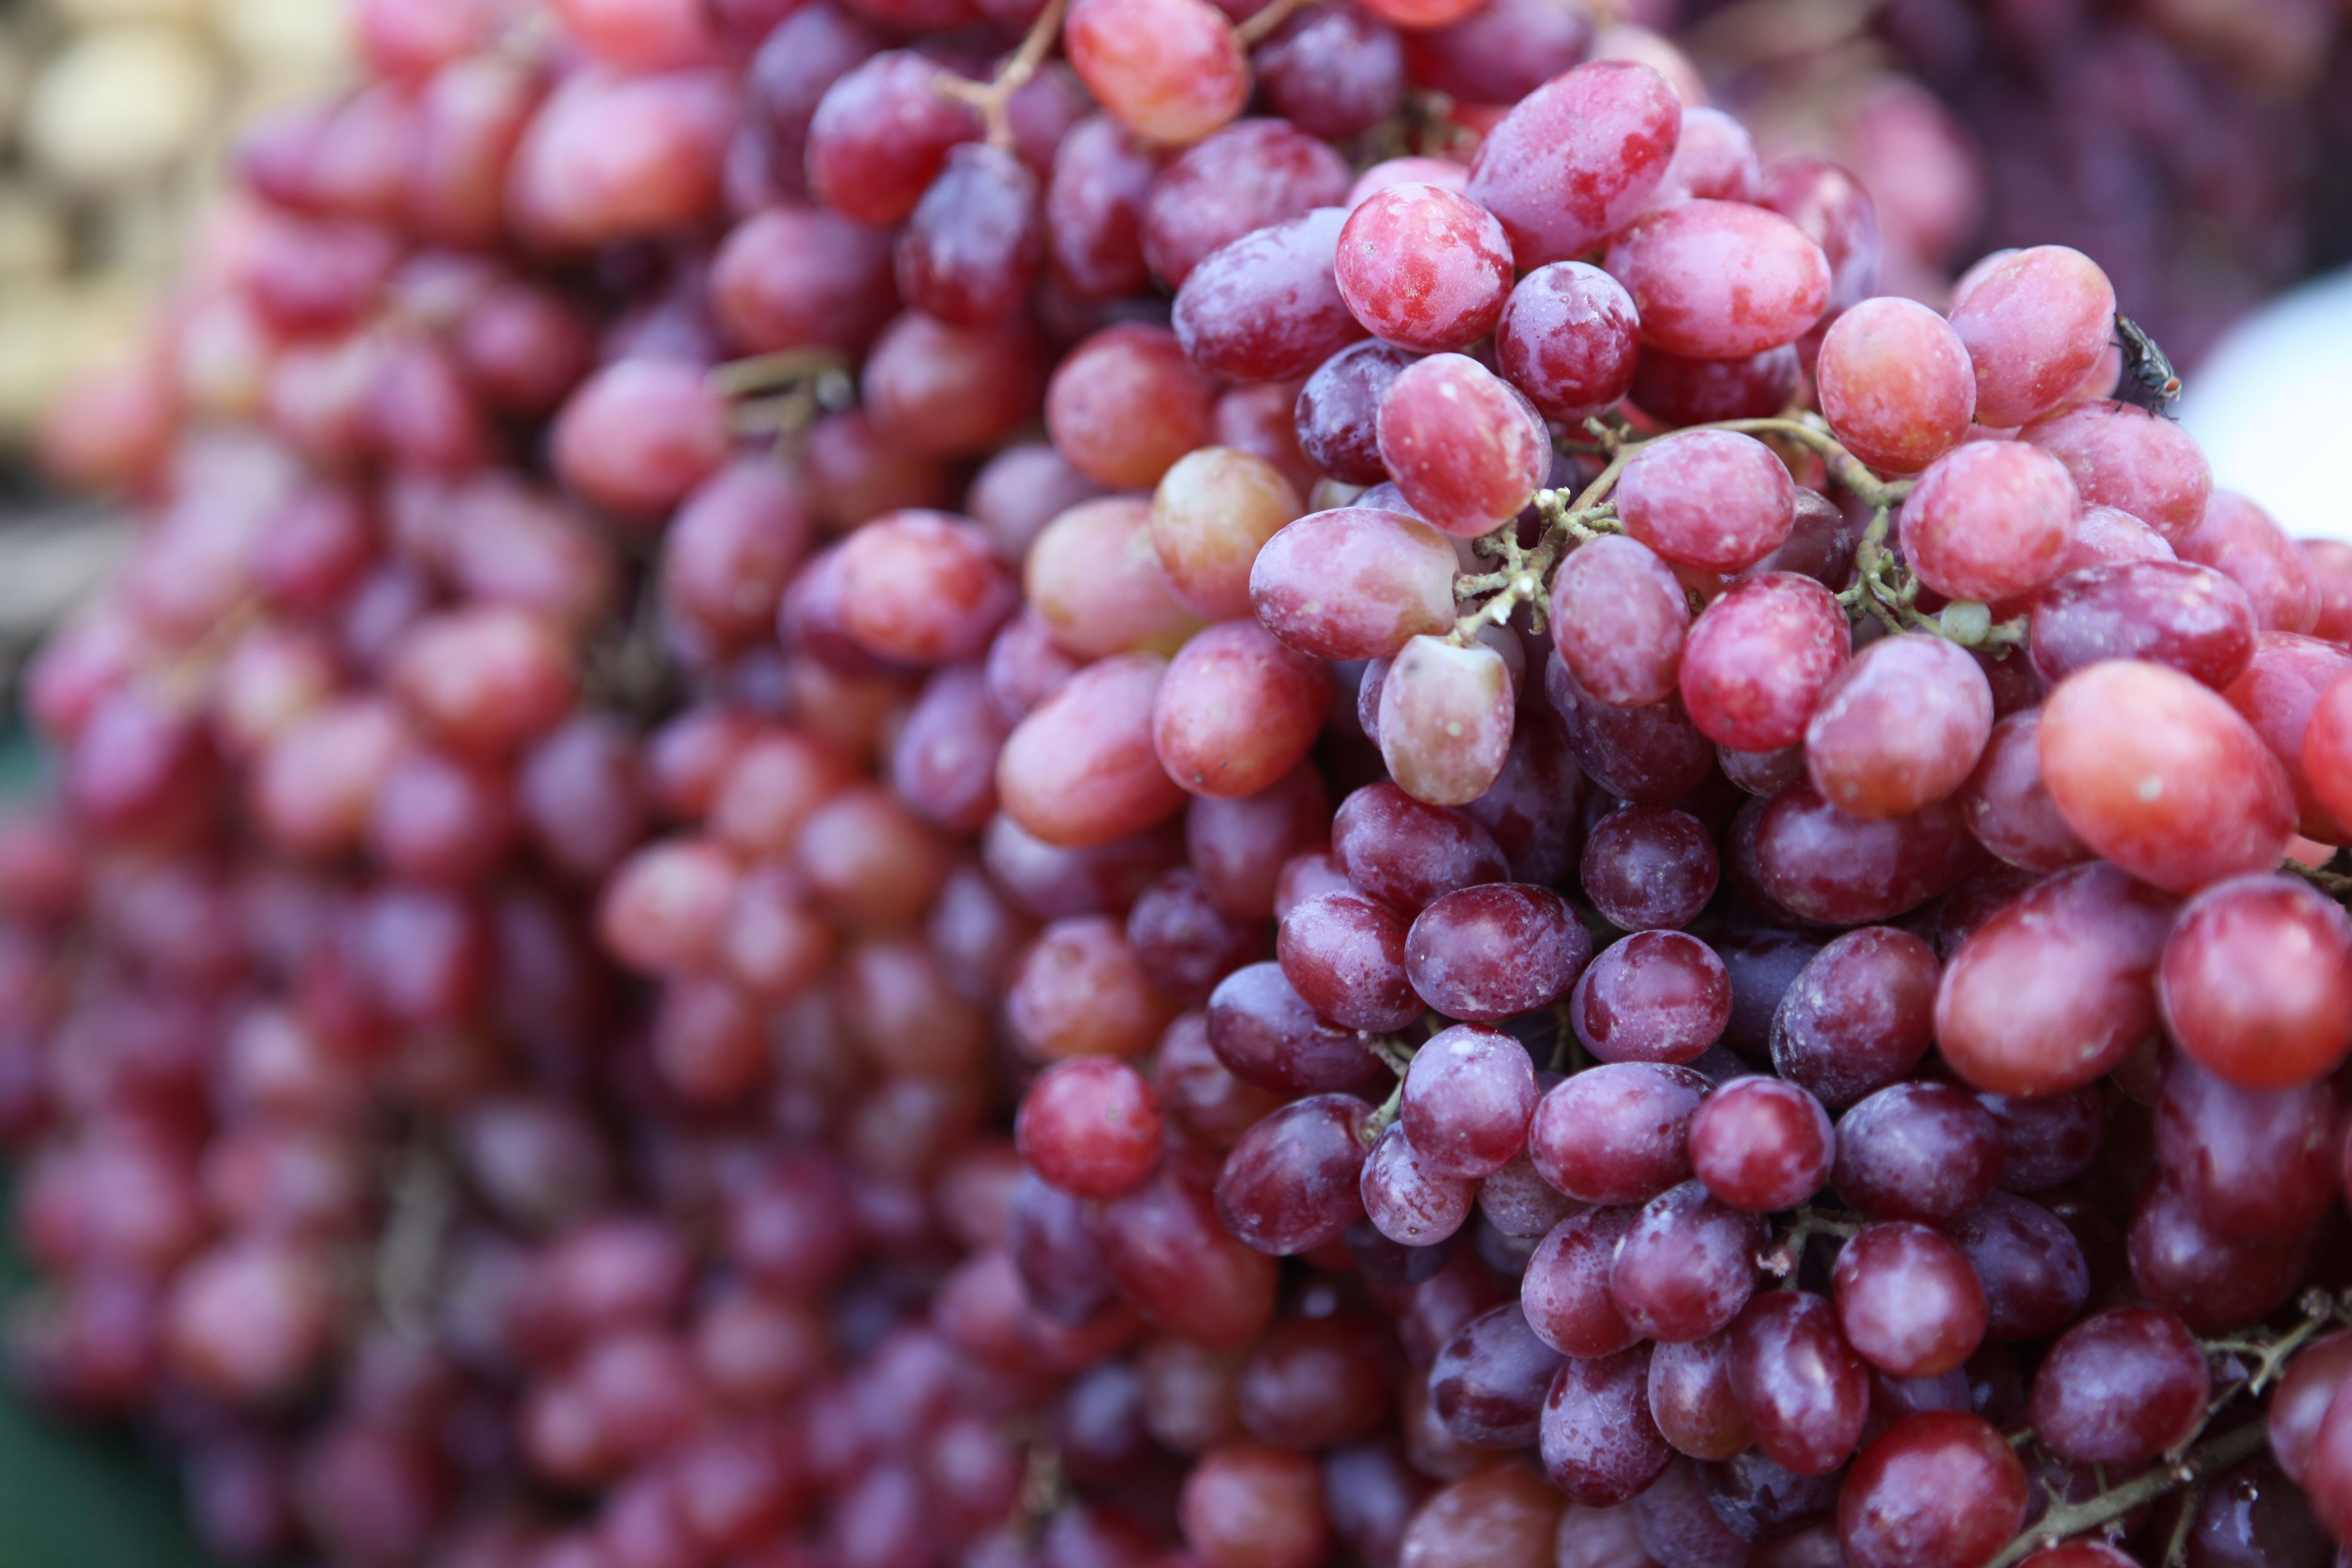 Bunches of grapes at an outdoor market.